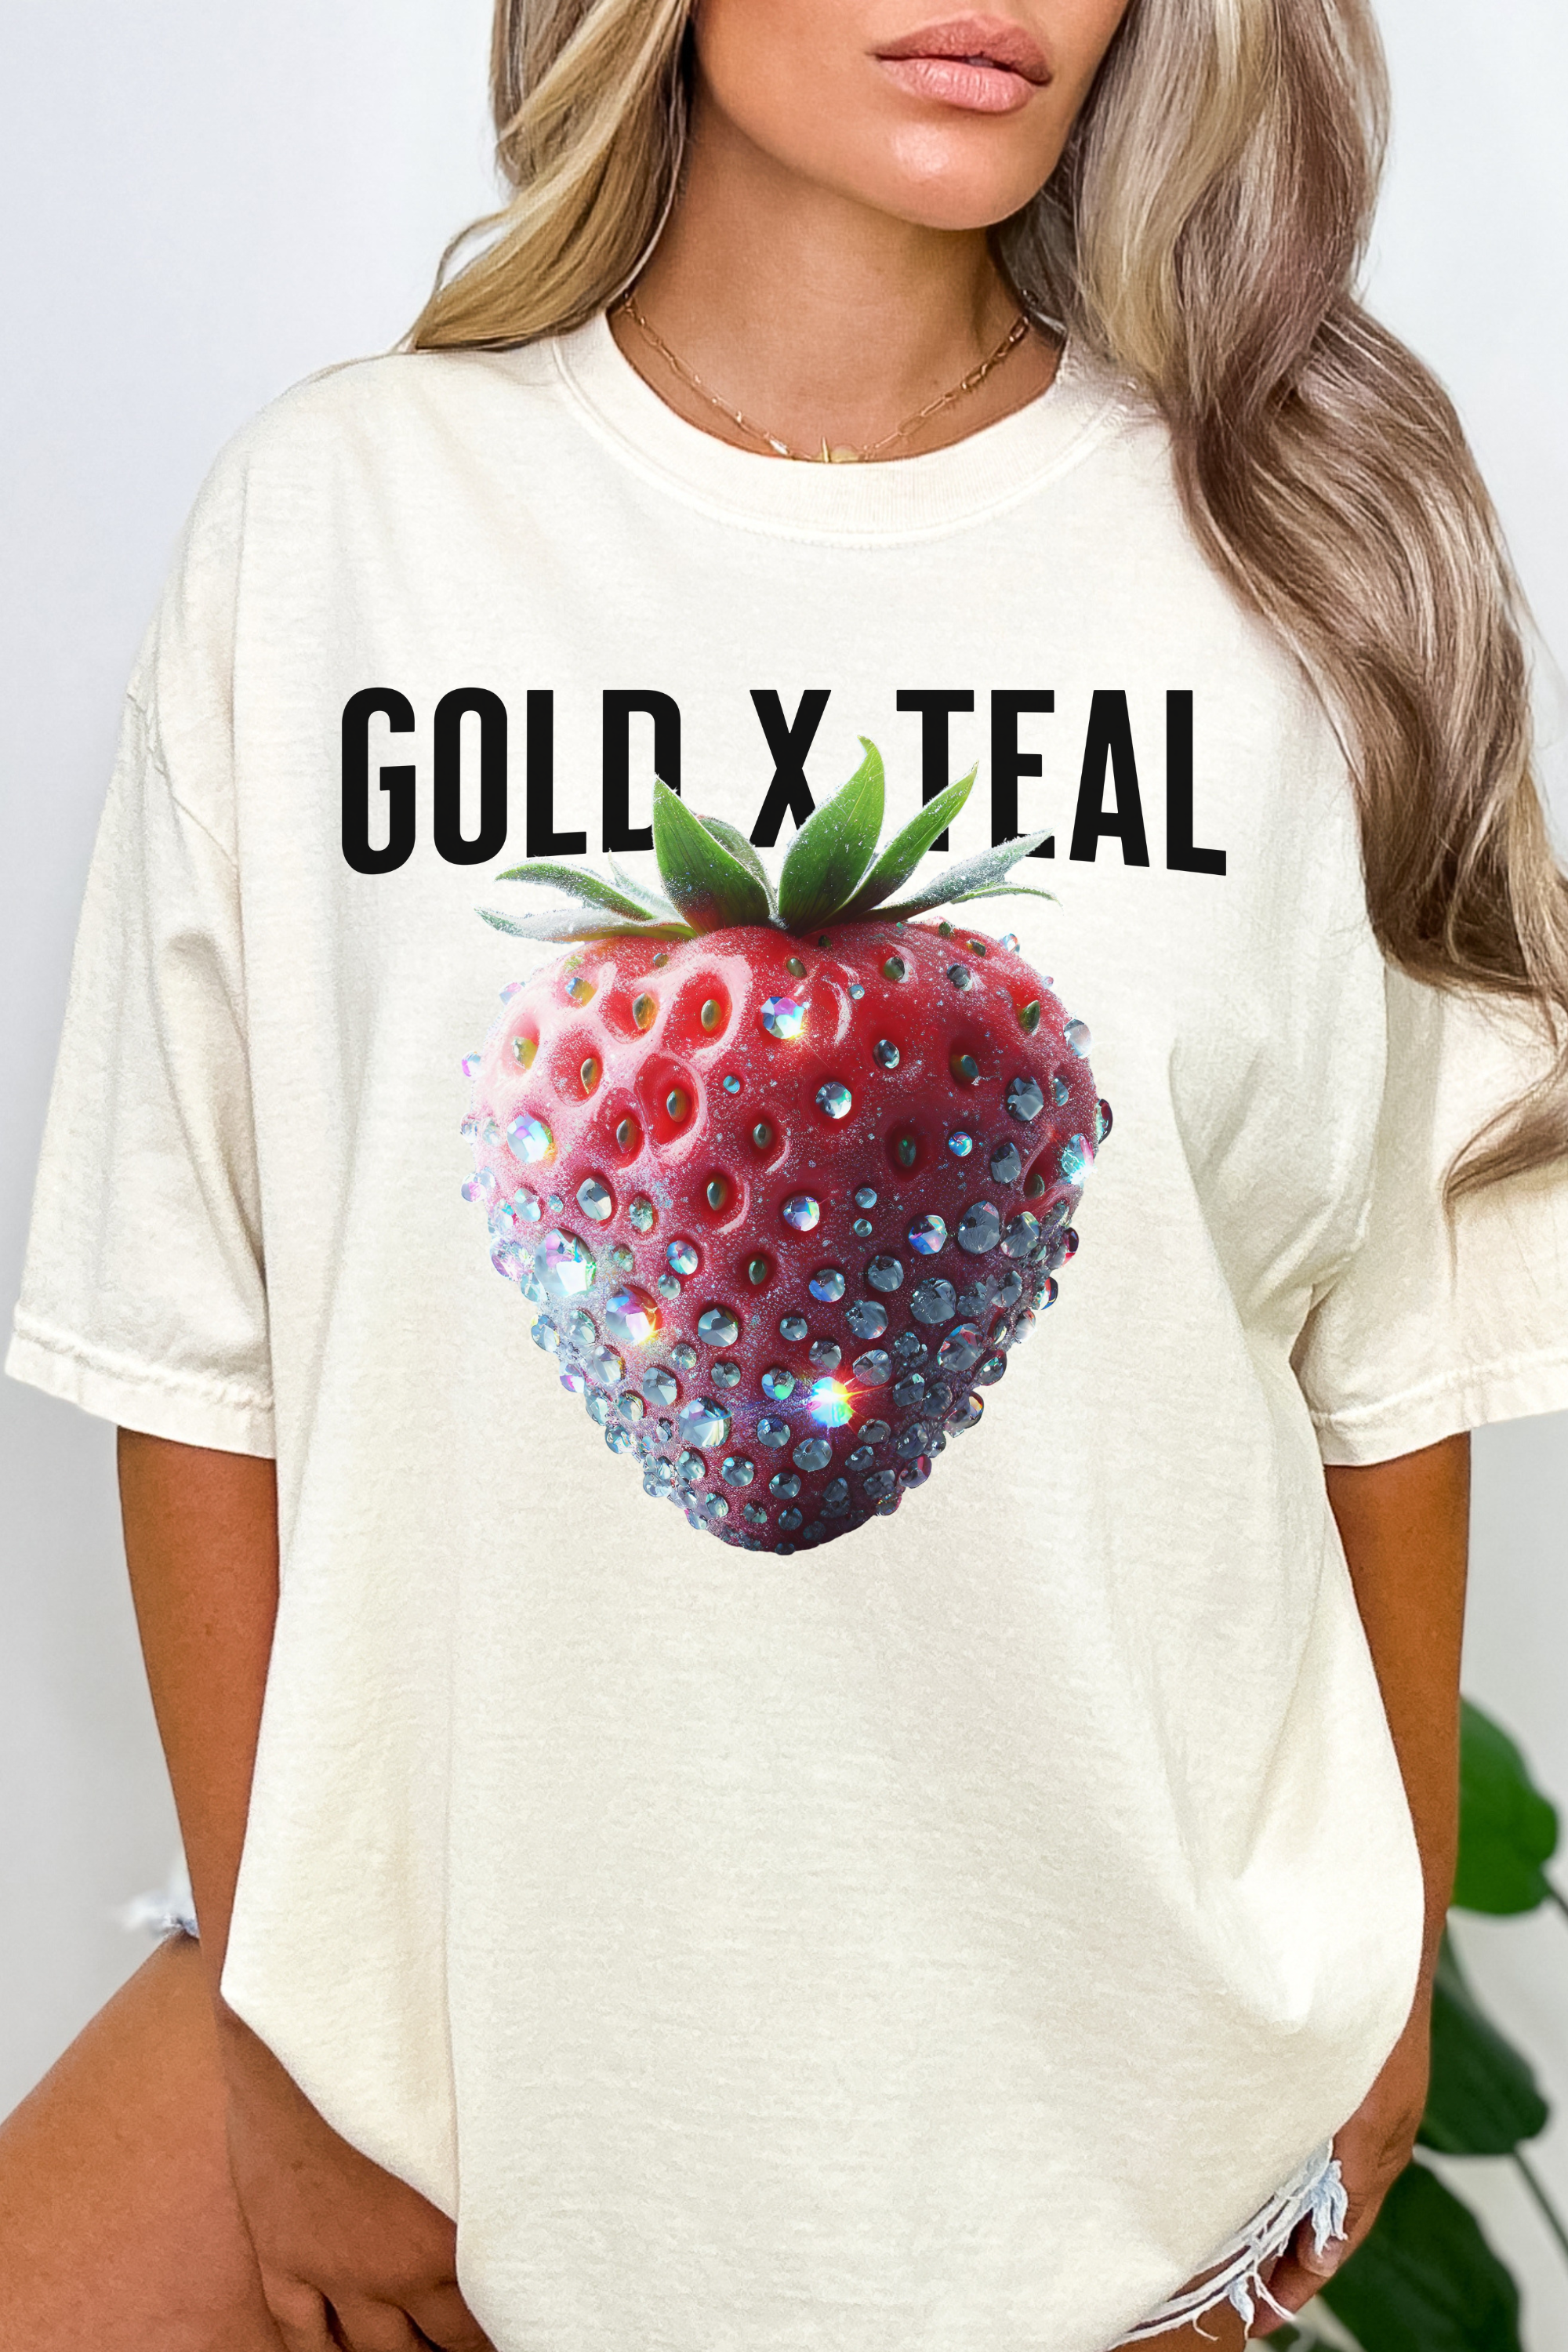 GOLDxTEAL gorgeous strawberry graphic t-shirt.